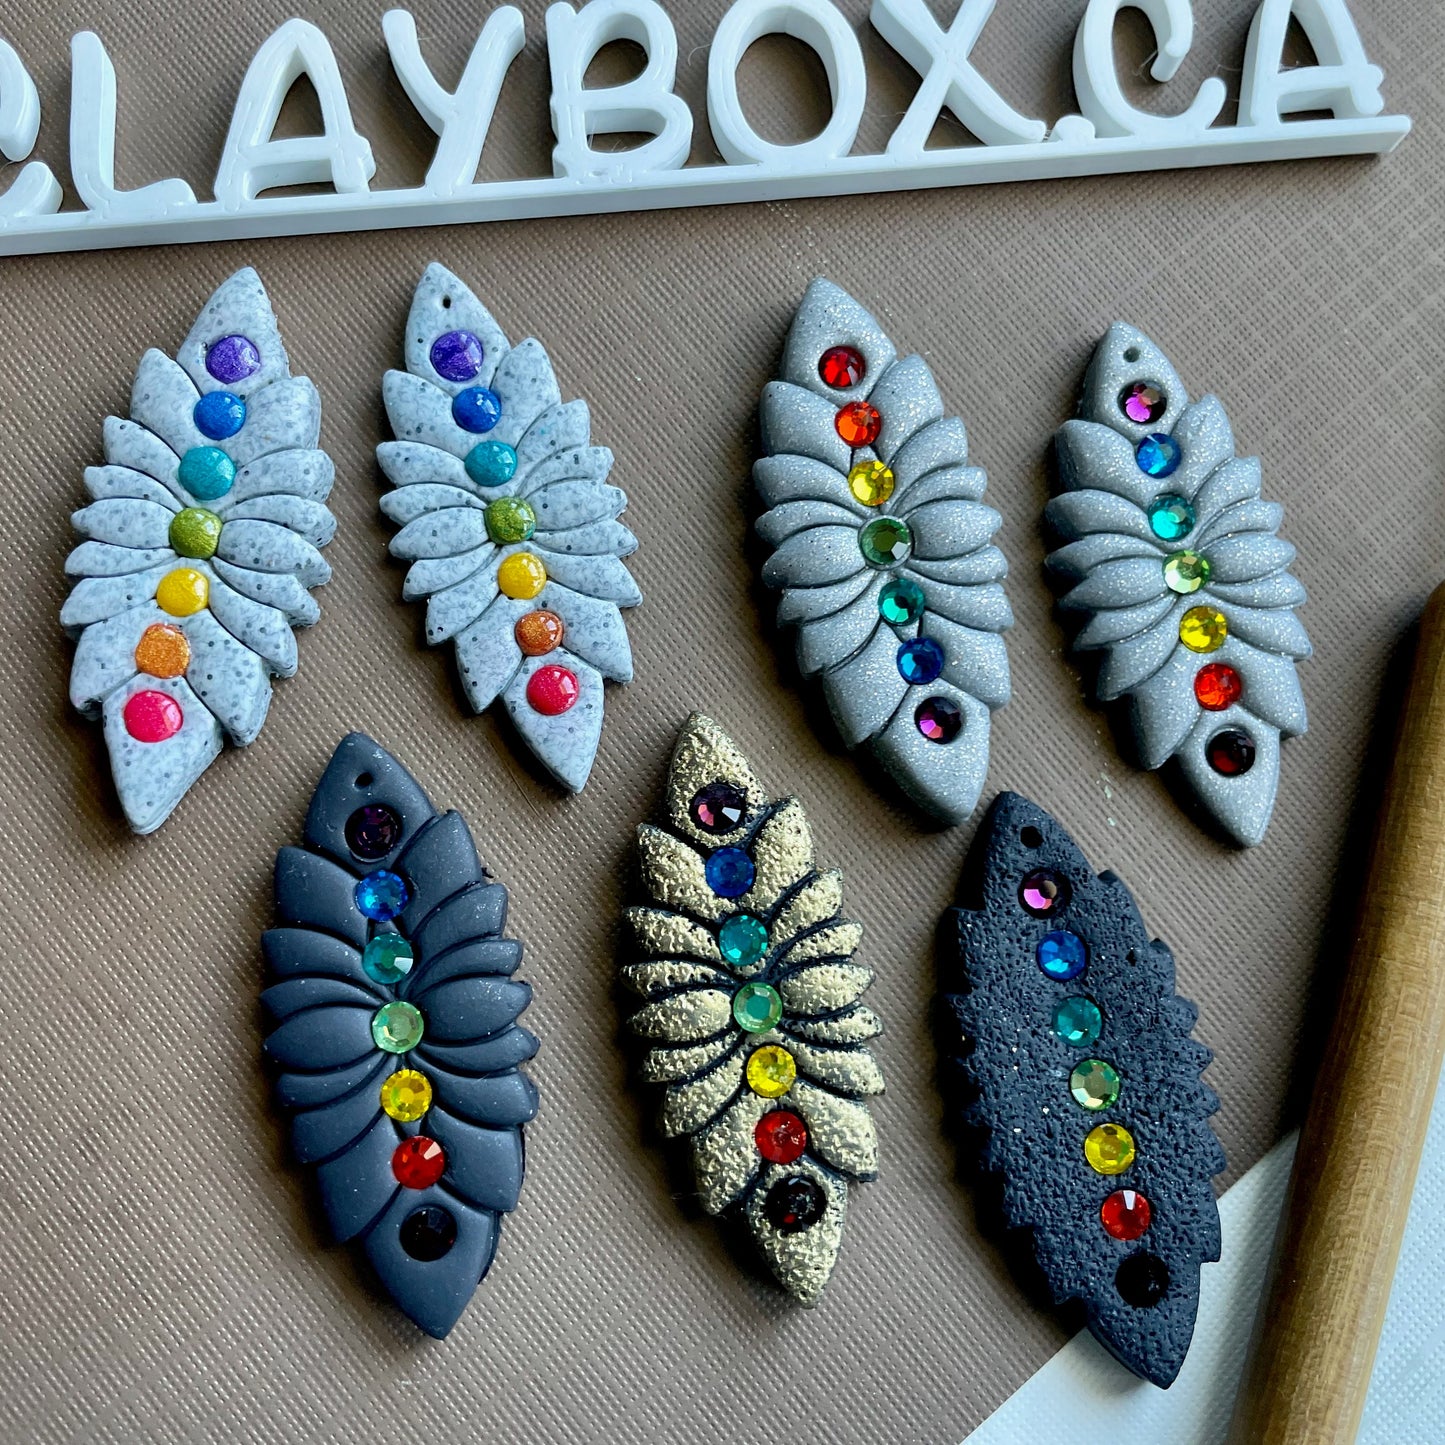 Chakra stamp and cutter set - made for use with polymer clay